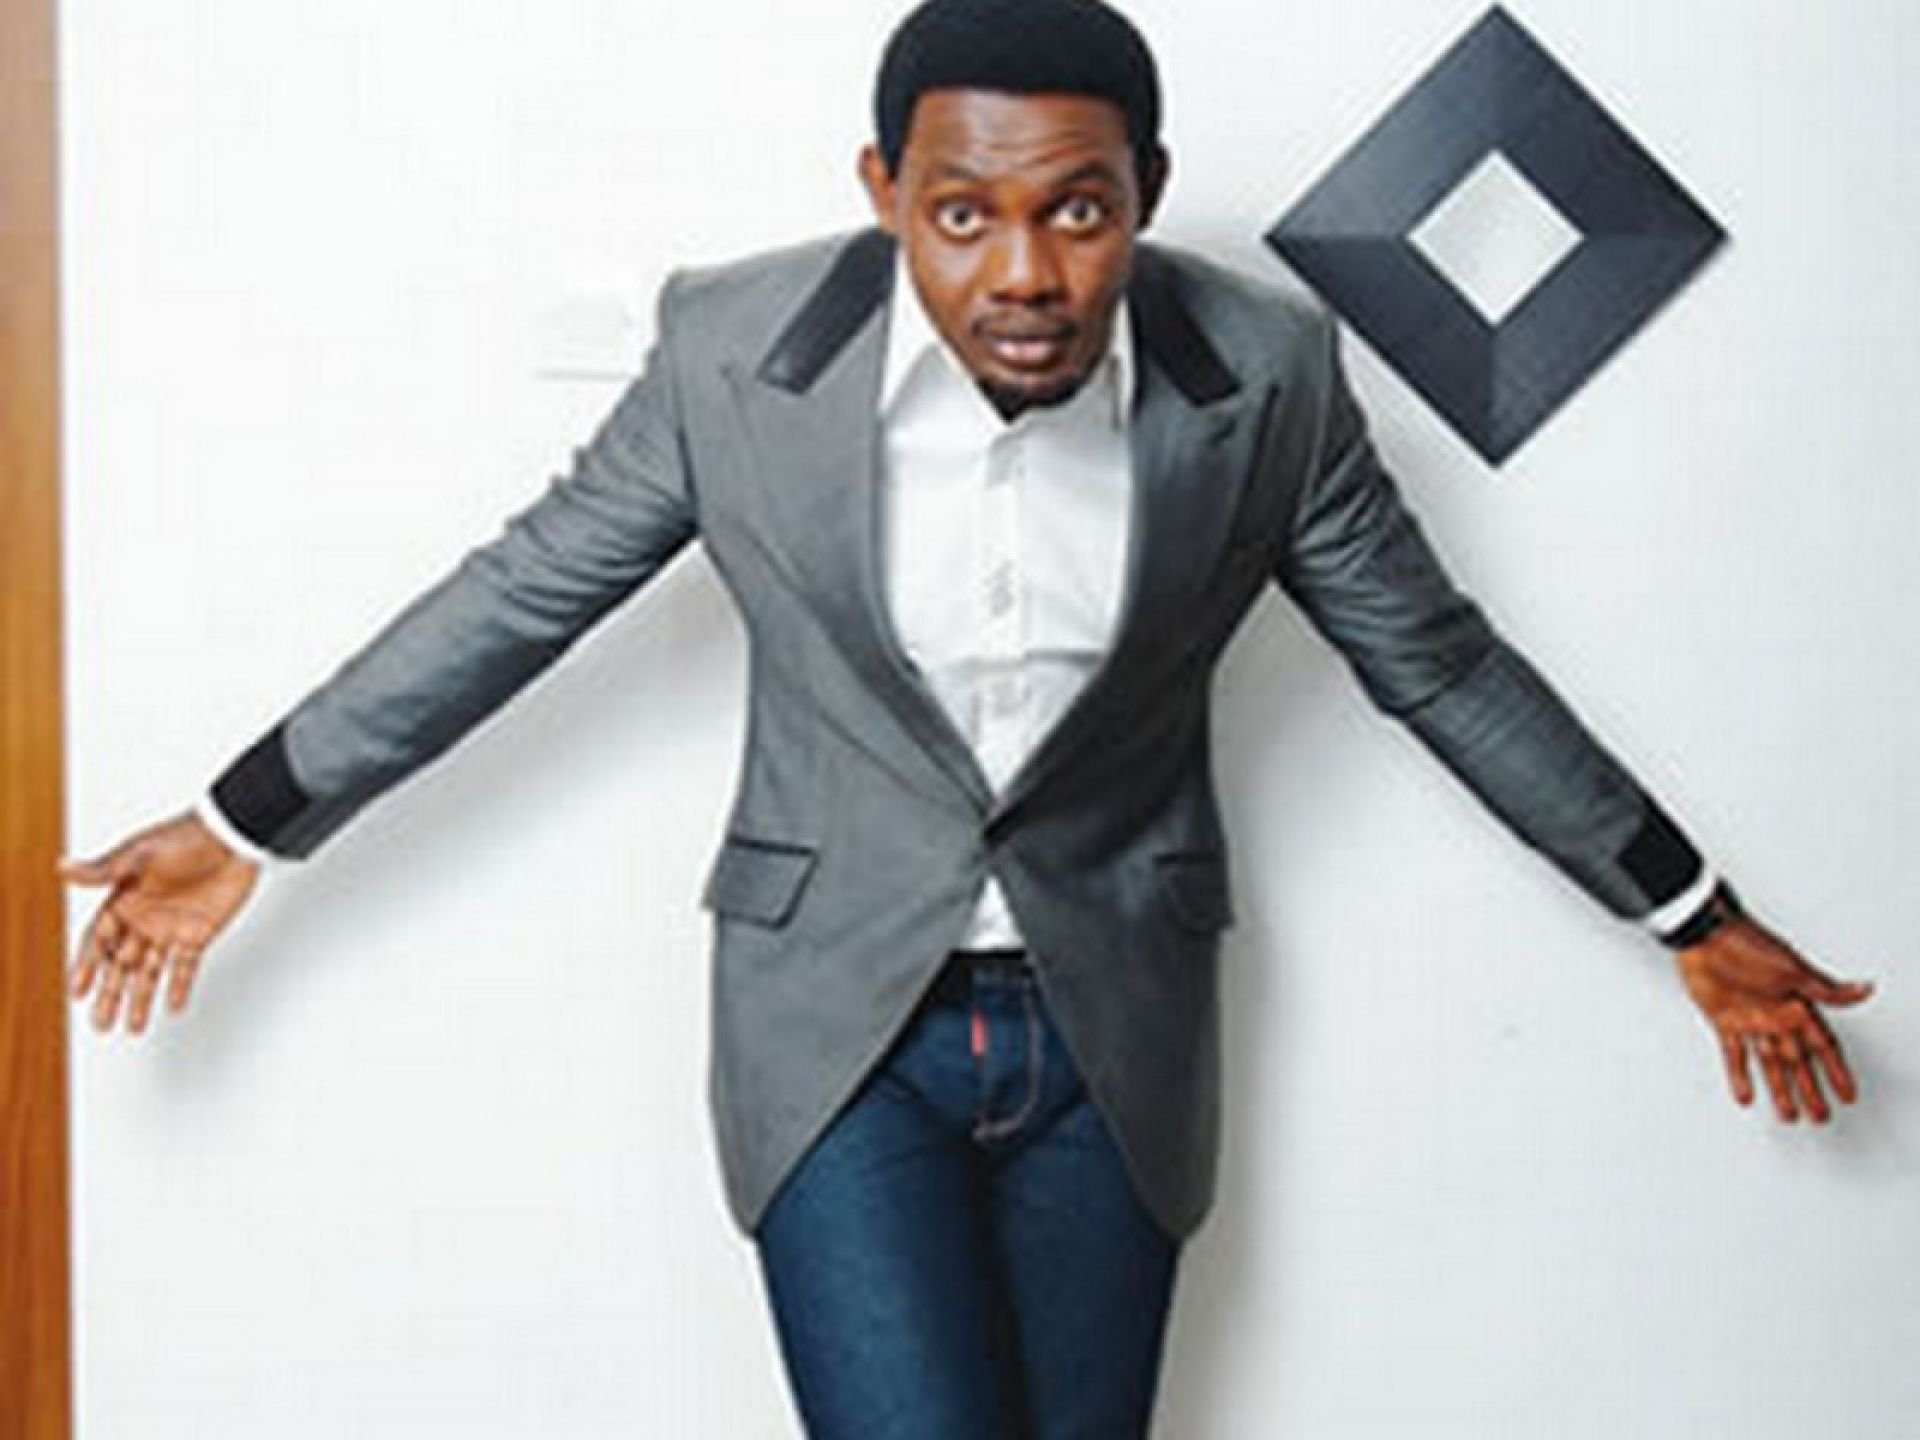 AY comedian reveals those who burnt down his house